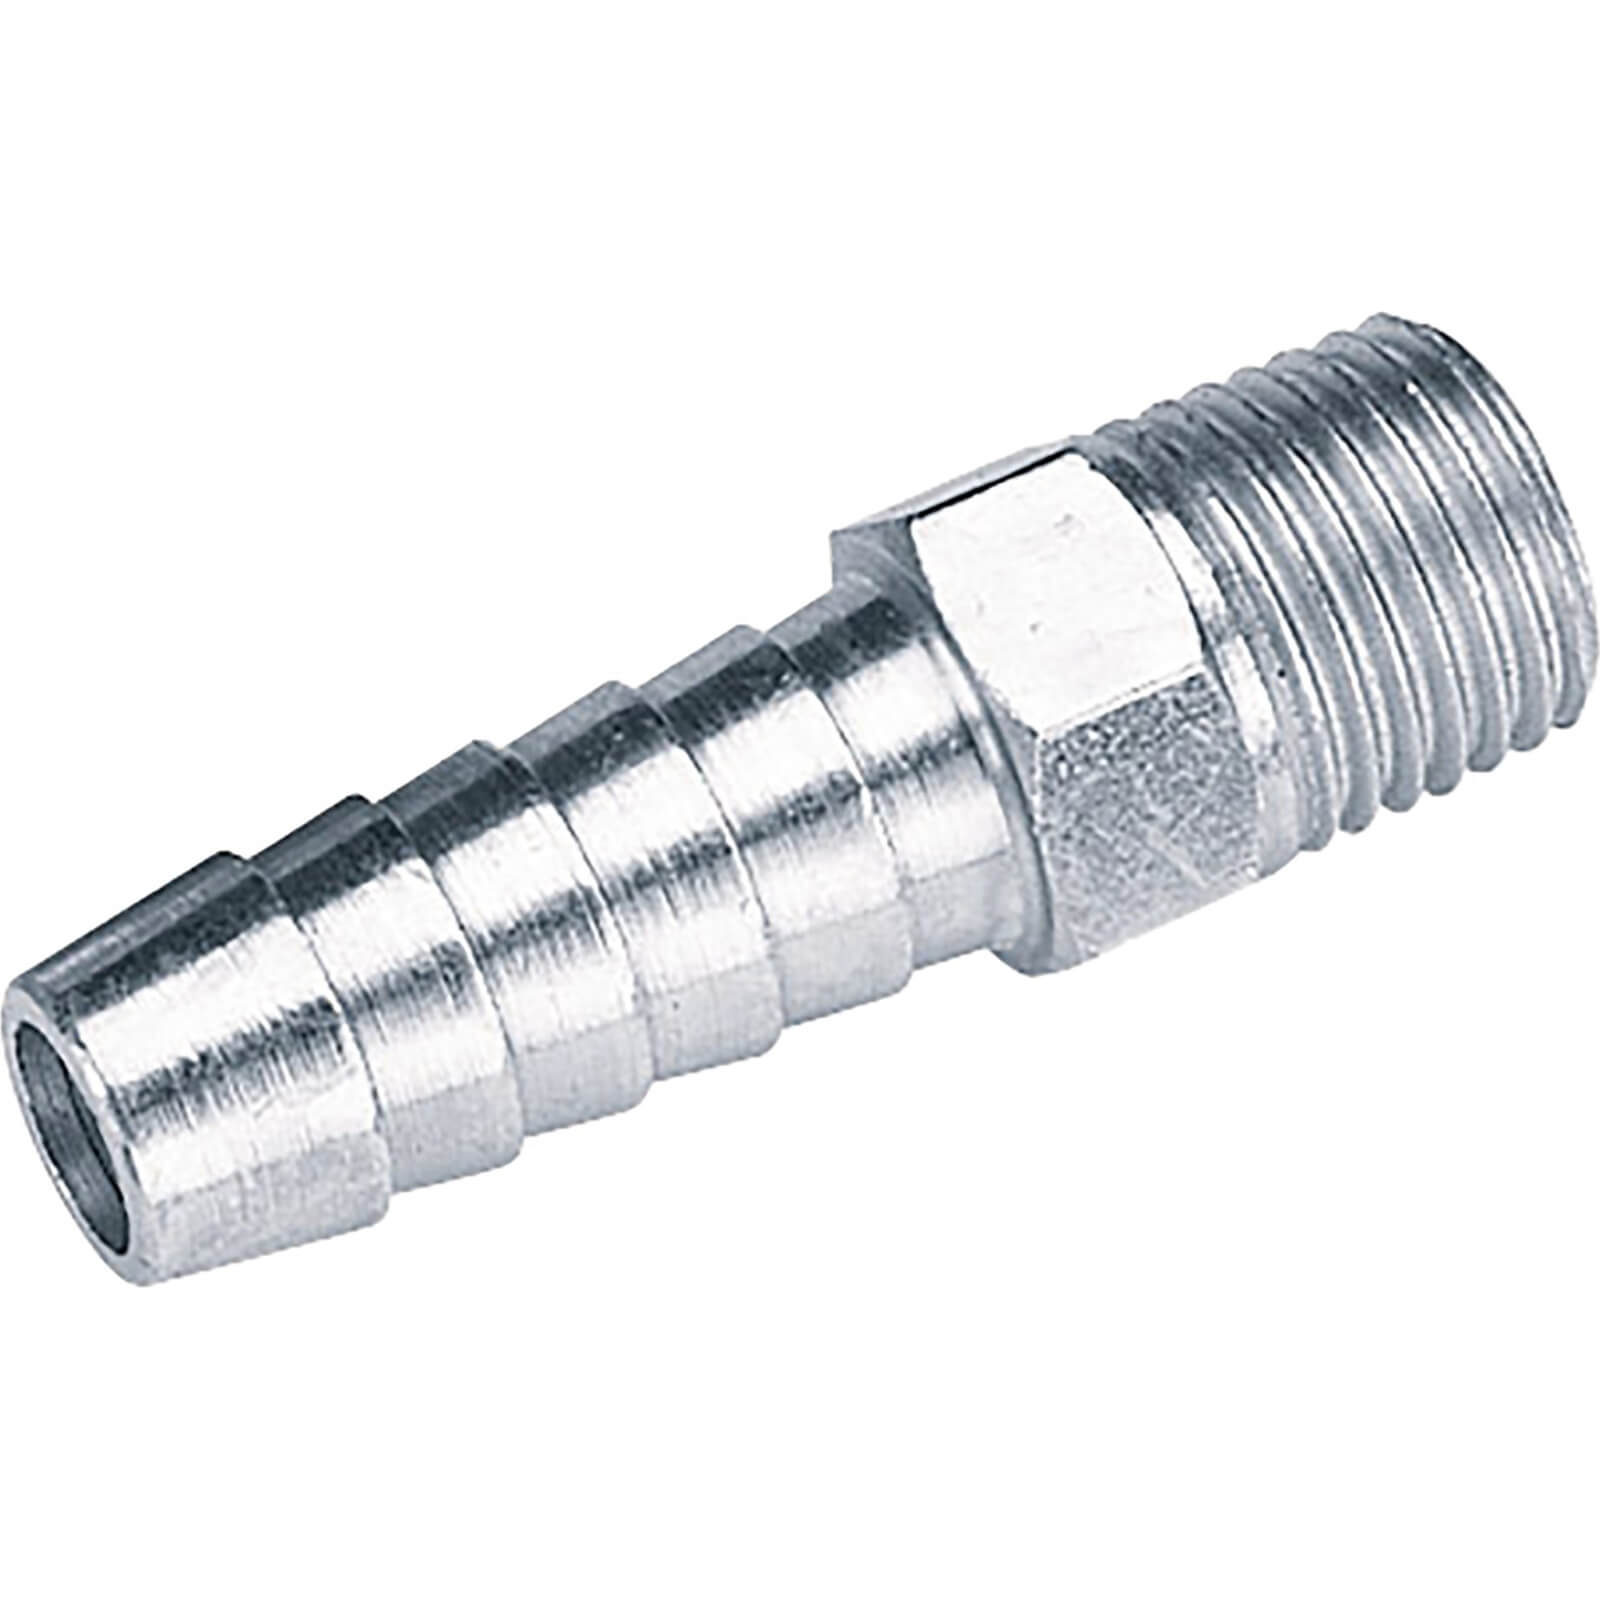 Photos - Equipment Accessory Draper PCL Tailpiece Air Line Fitting BSPT Male Thread 1/4" BSP 3/8" Pack 